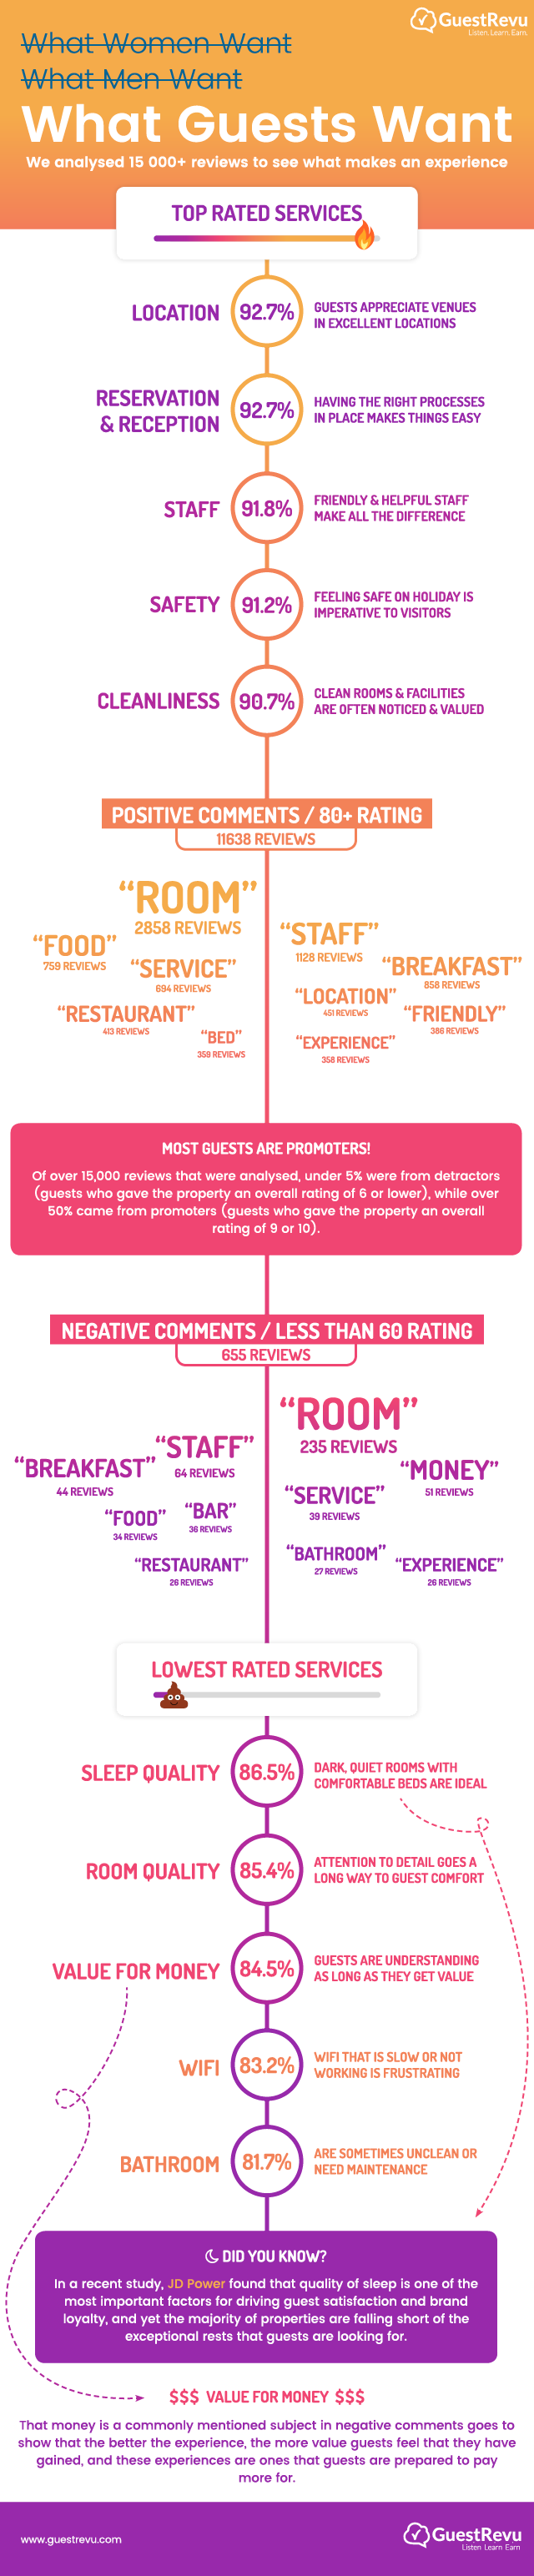 what-guests-want-infographic-GuestRevu＂width=